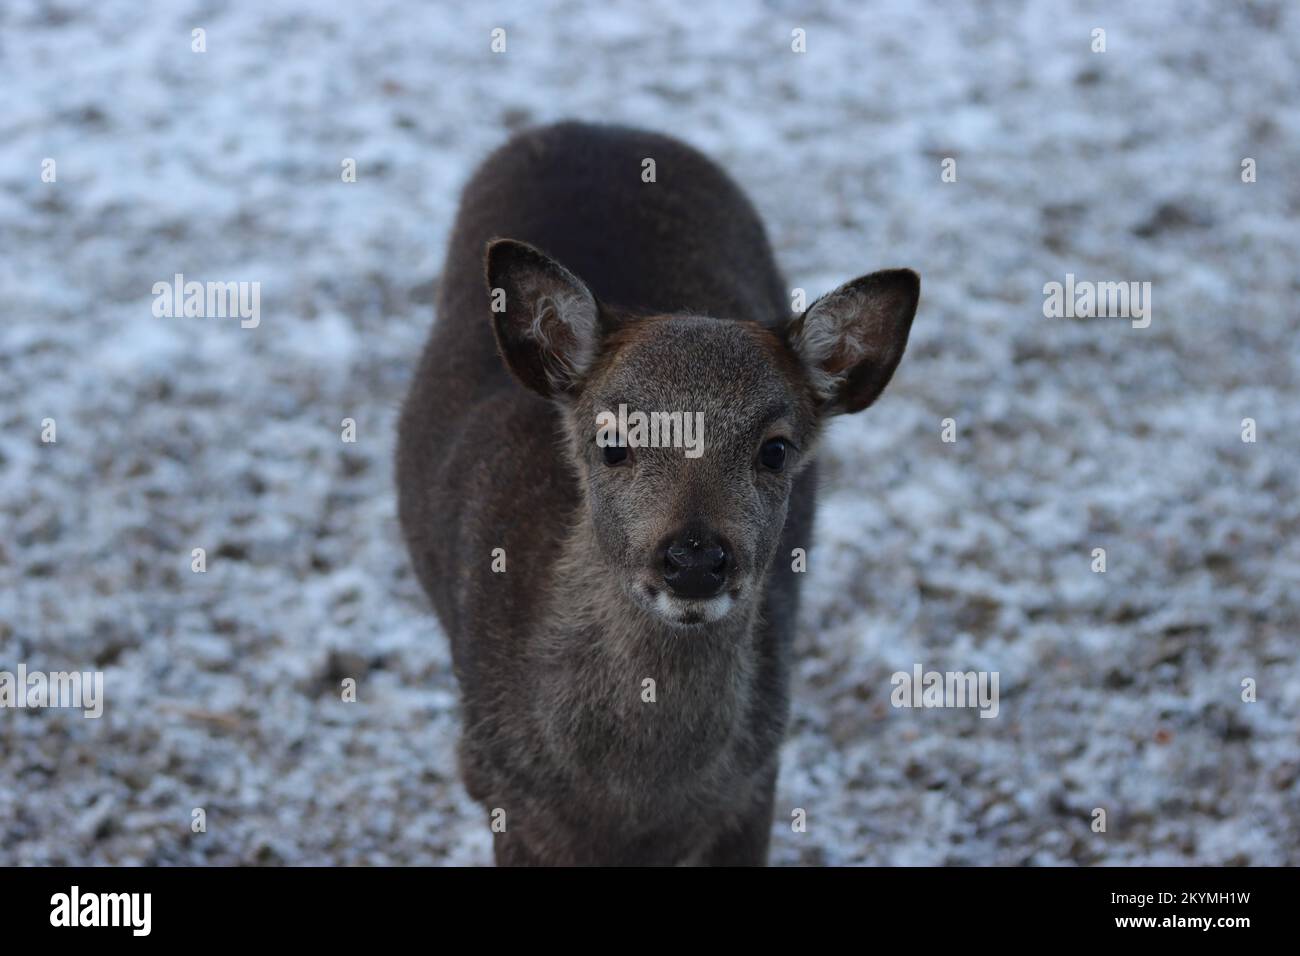 A pretty little deer looks at my camera with interest, wintry background Stock Photo